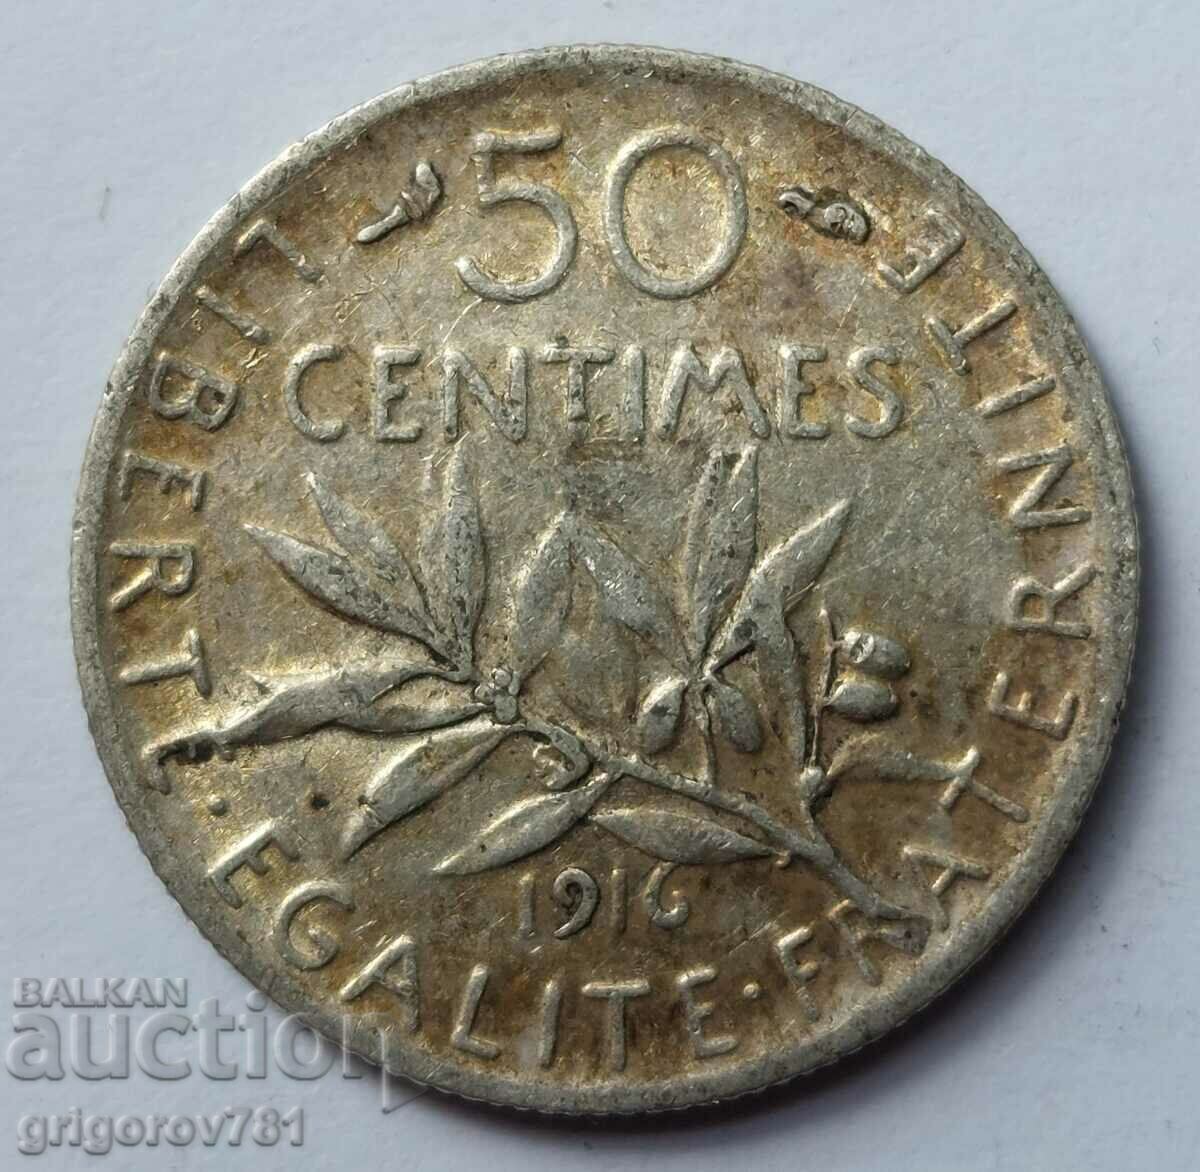 50 centimes silver France 1916 - silver coin №8